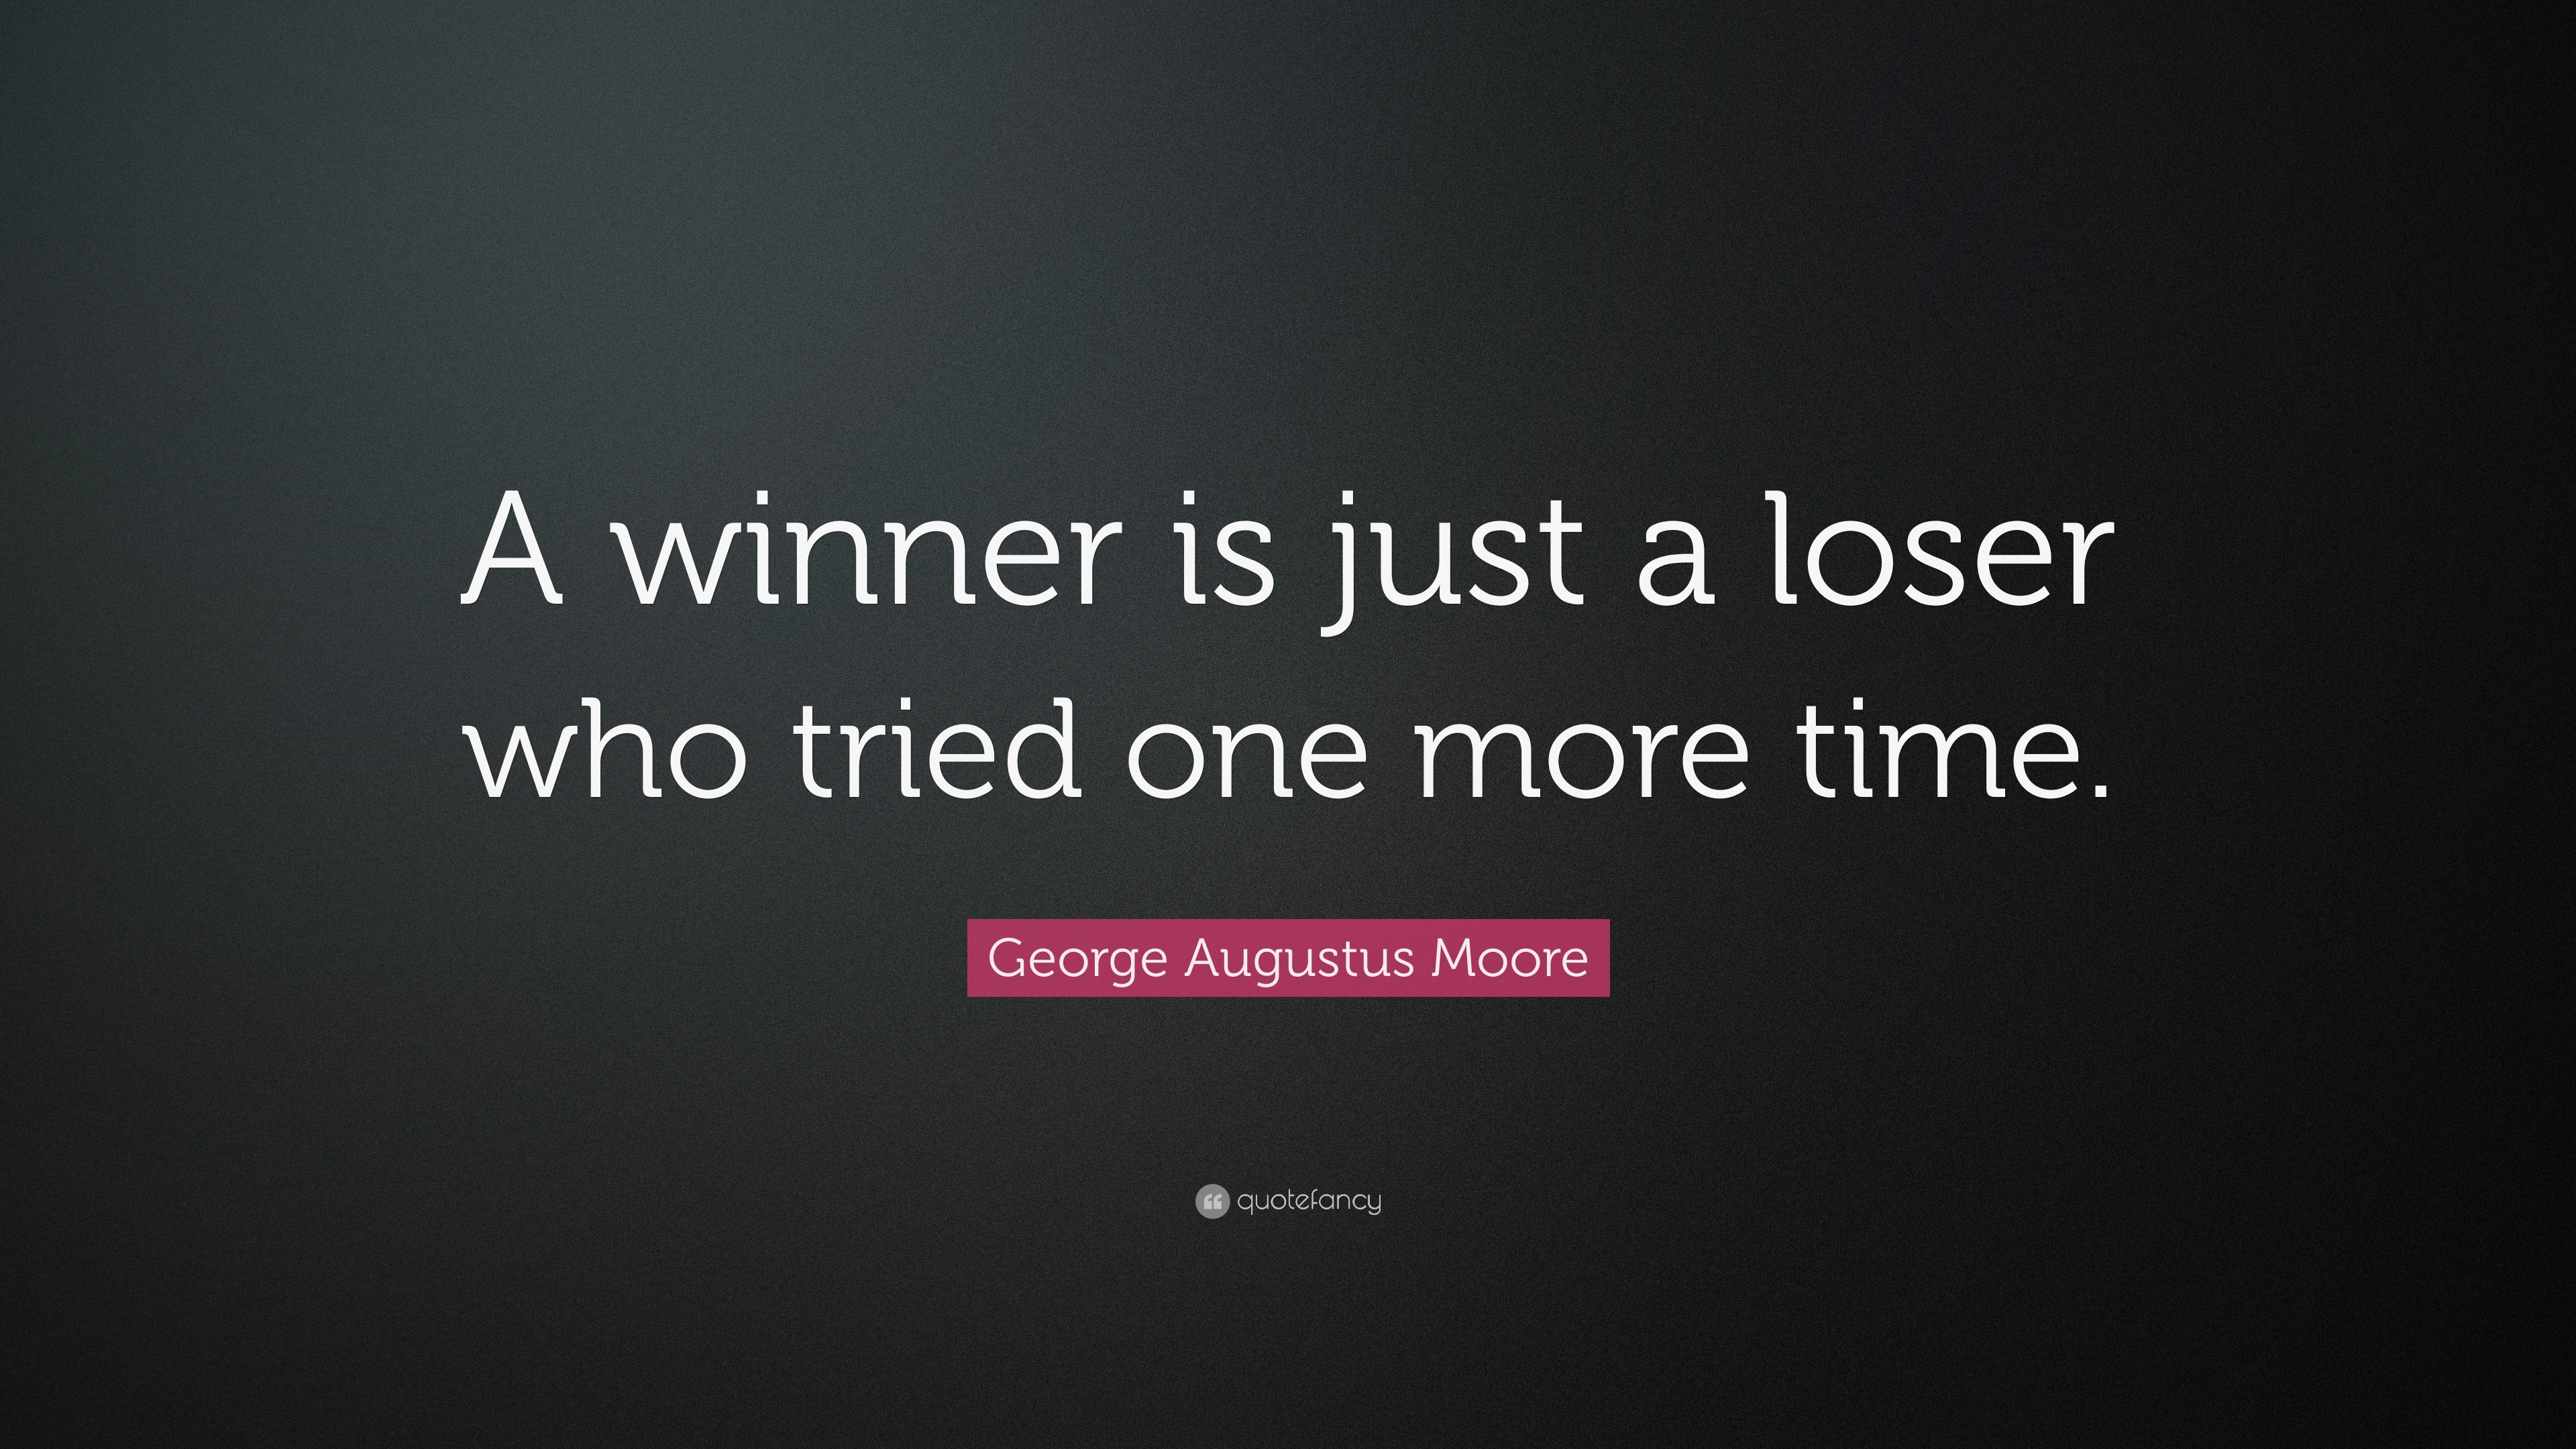 George Augustus Moore Quote: “A winner is just a loser who tried one